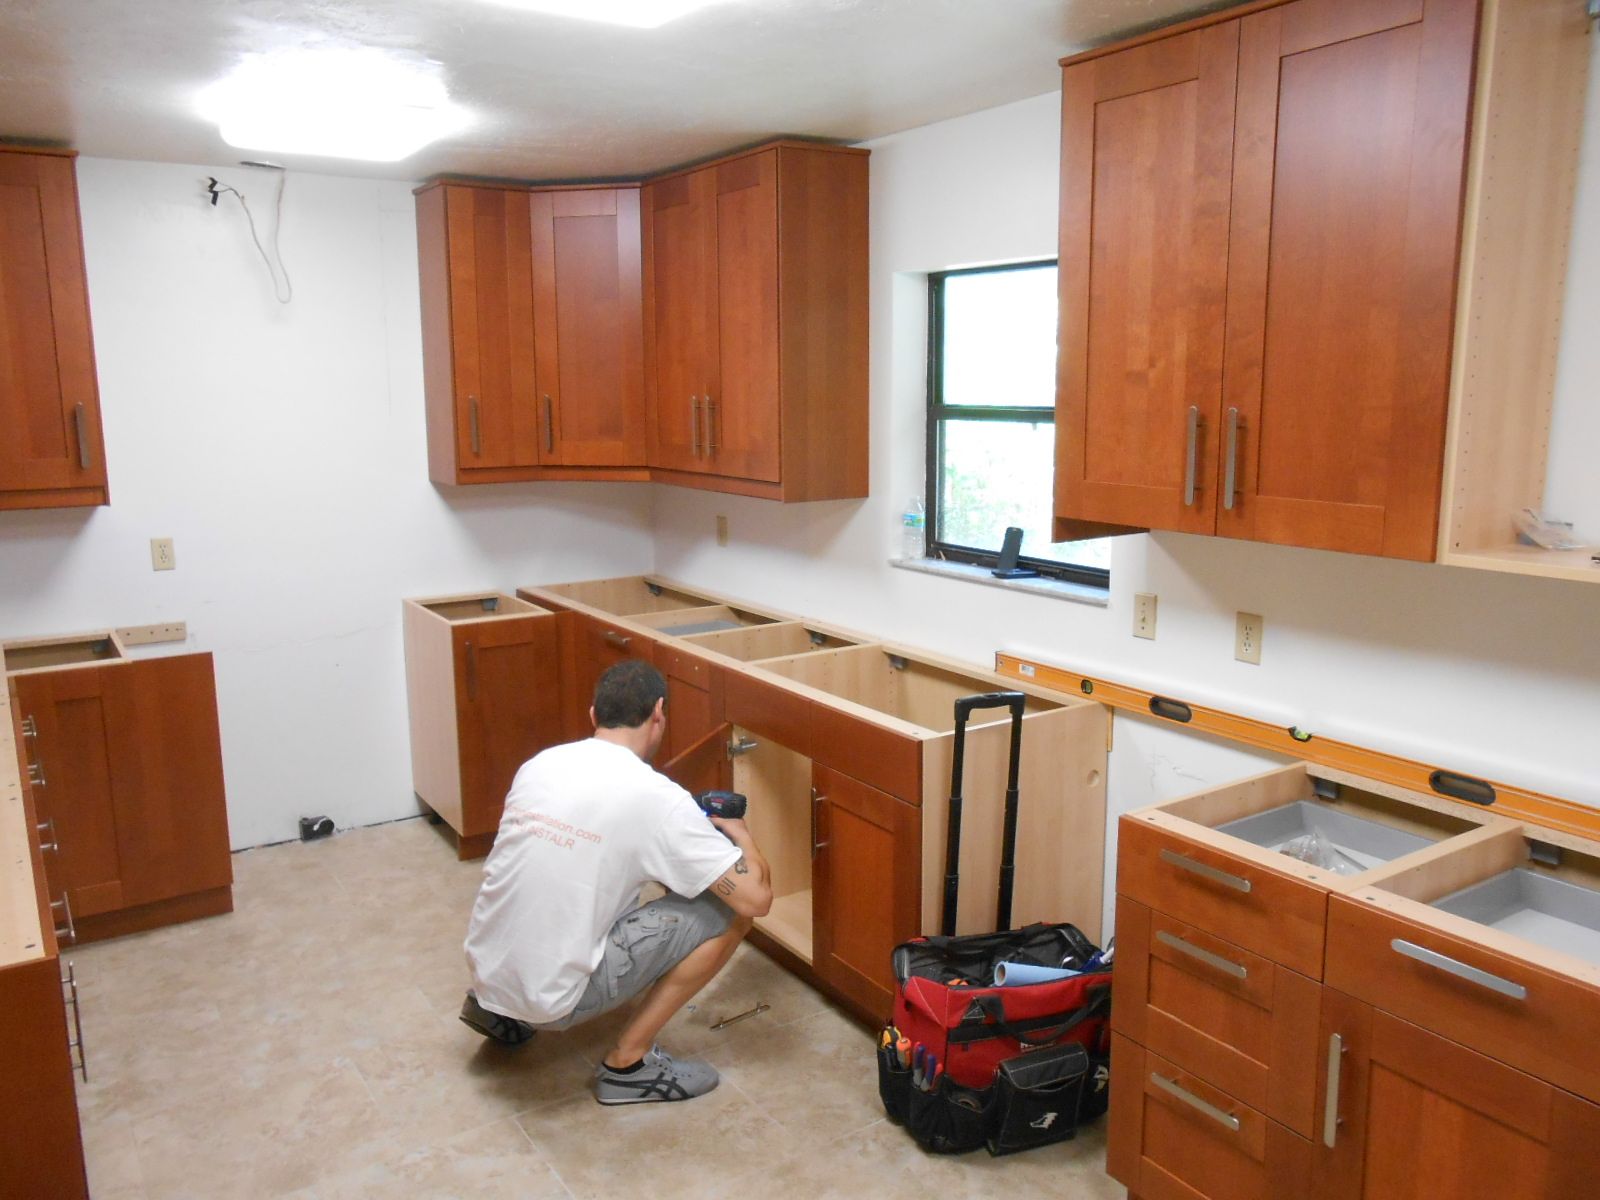 Kitchen  Renovation service in Liverpool